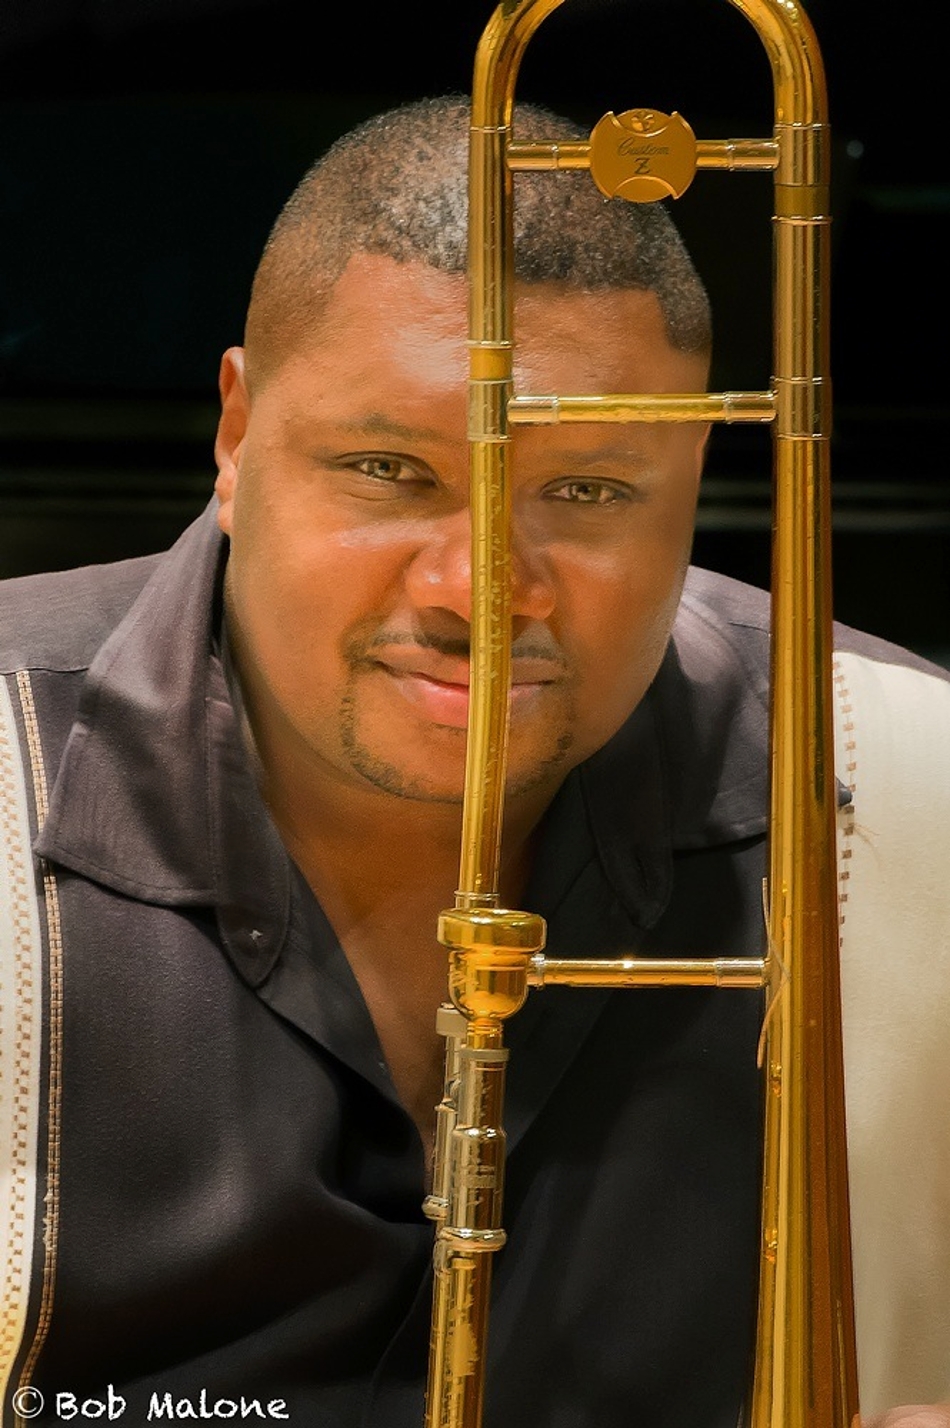 Award-winning trombonist Wycliffe Gordon will join The University of Scranton Concert Band as guest soloist for a concert at 7:30 p.m. on Sunday, Nov. 16, in the Houlihan McLean Center. The concert is free of charge and open to the public.